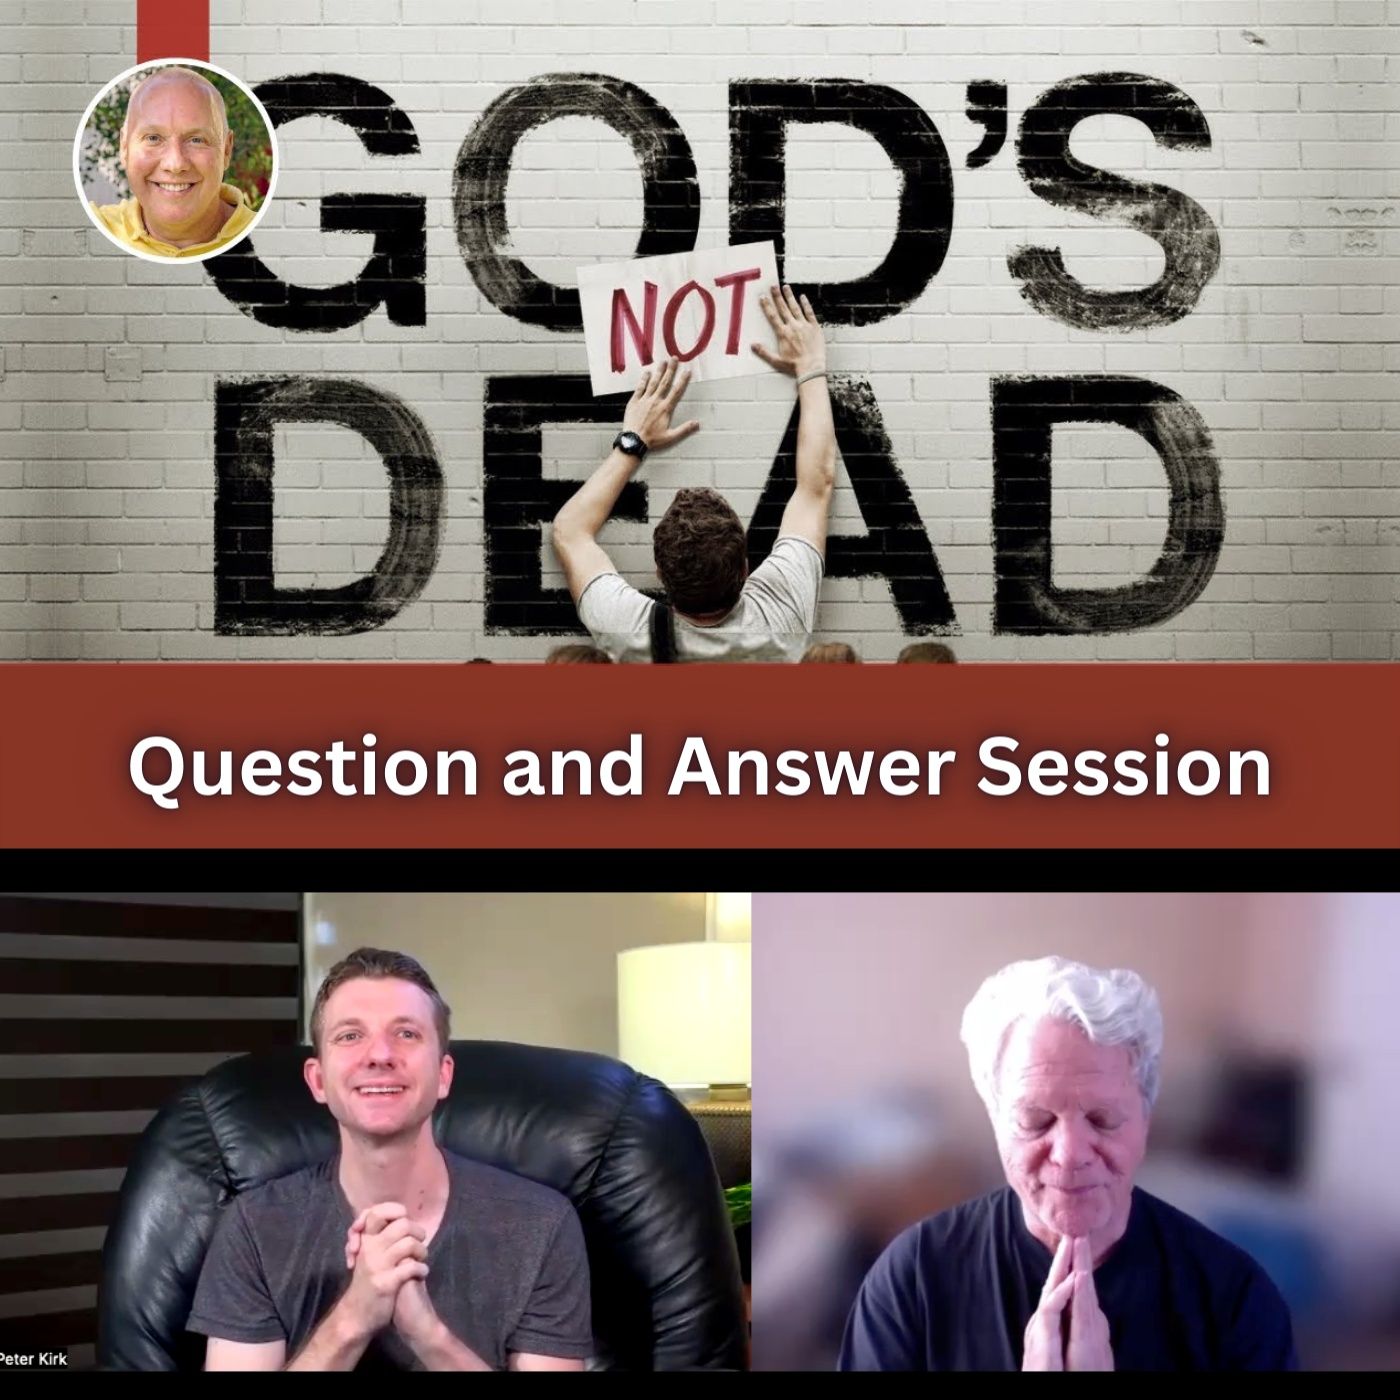 Q&A Session - After the Movie "God Is Not Dead 1" - with Peter Kirk